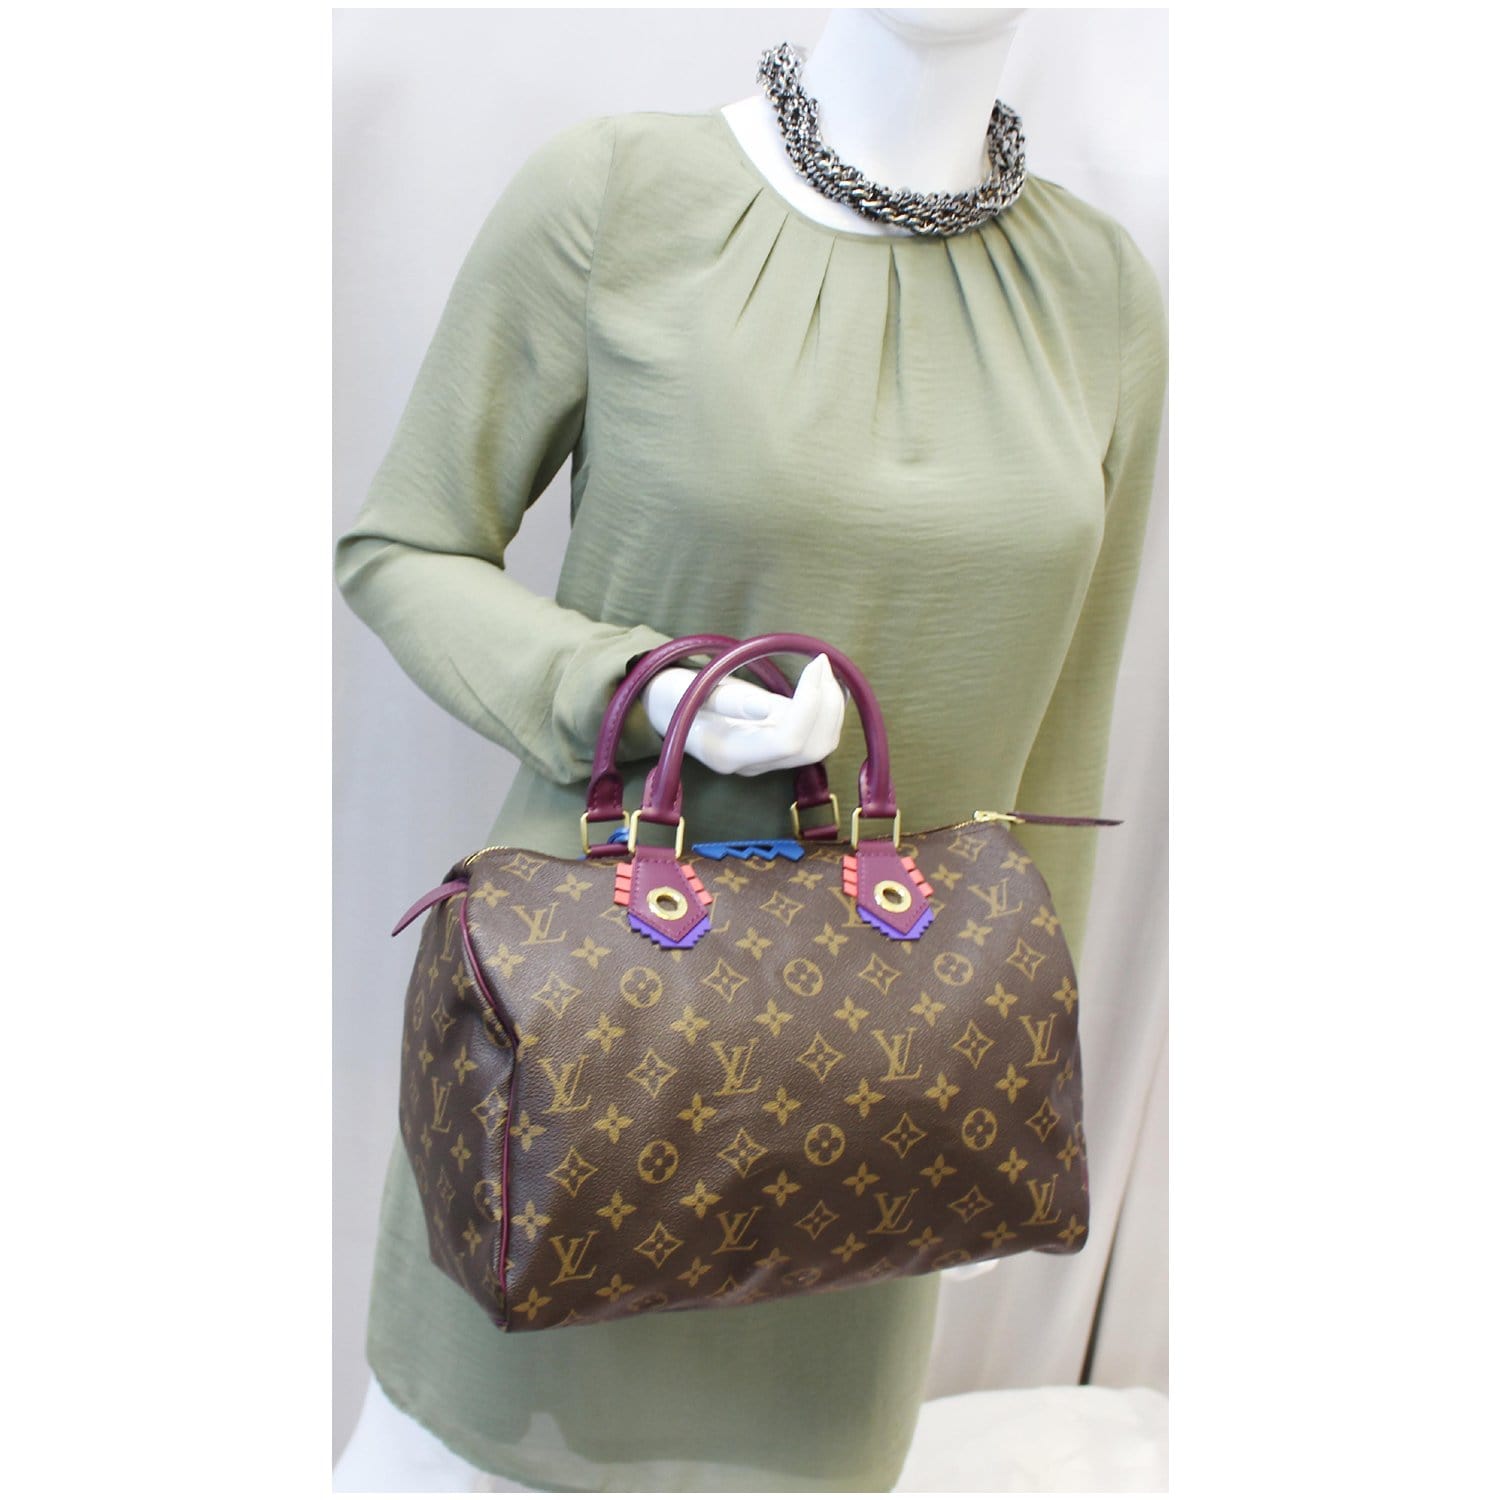 Sold at Auction: Louis Vuitton - LV - Speedy Totem 30 Brown